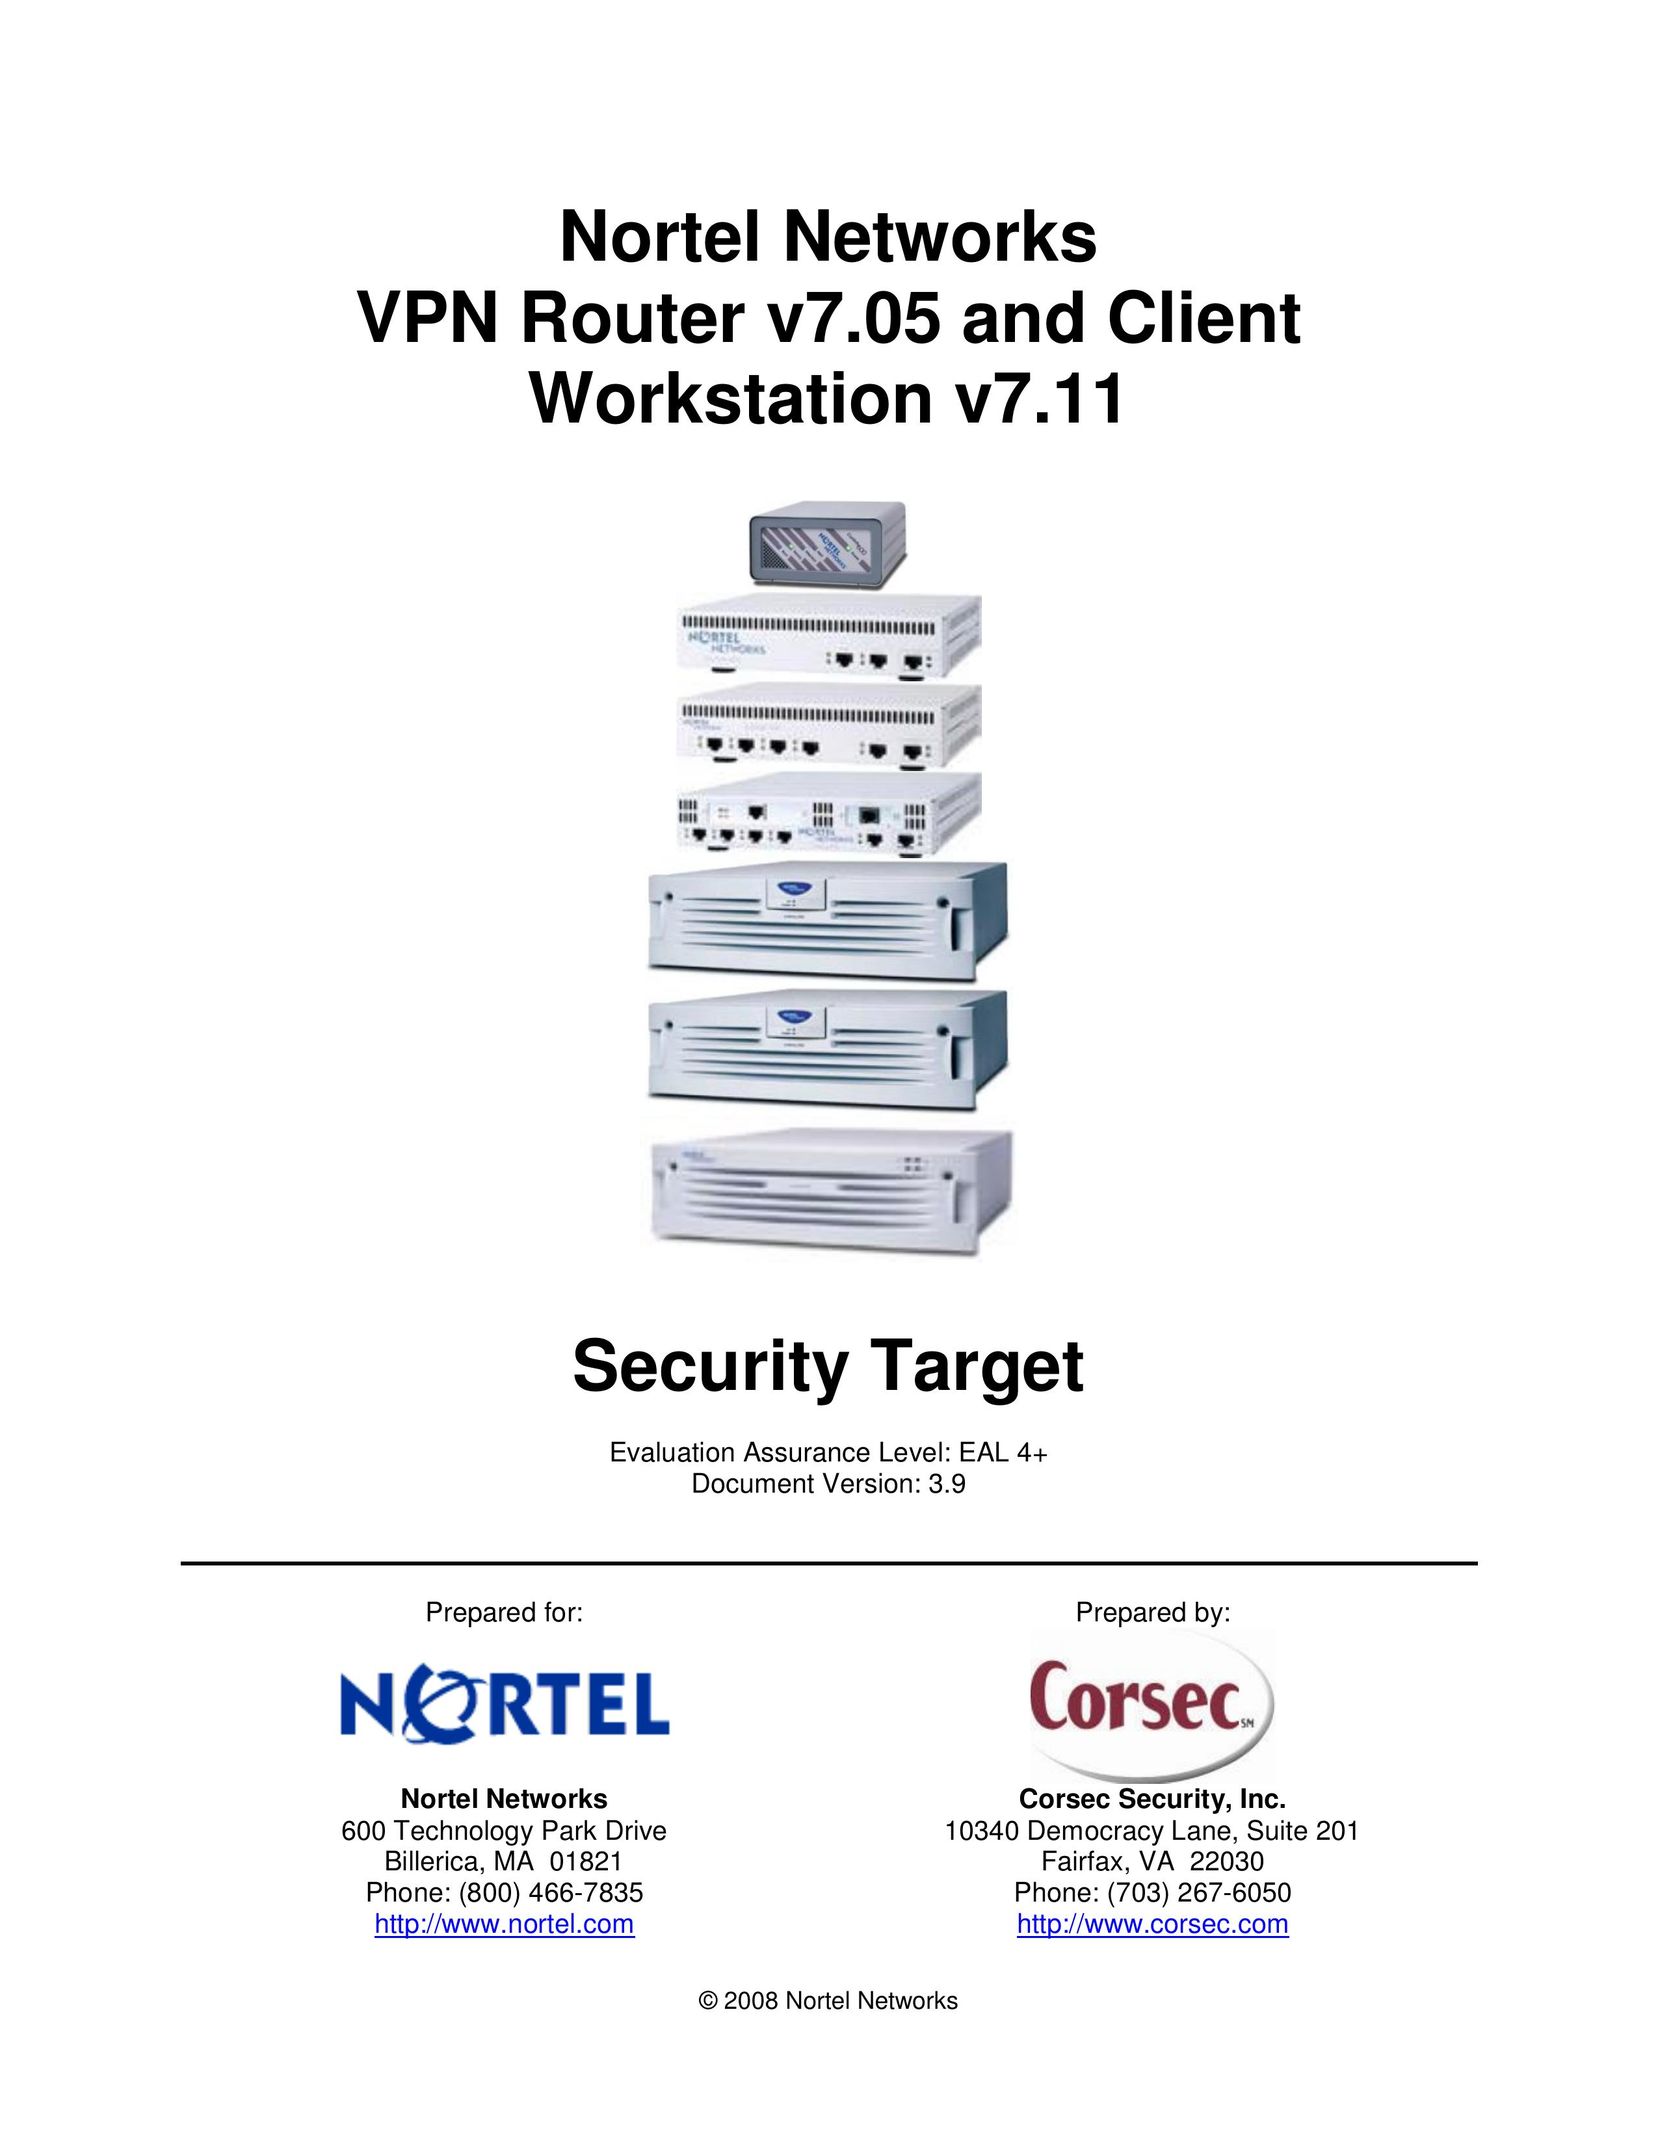 Nortel Networks 7.11 Network Router User Manual